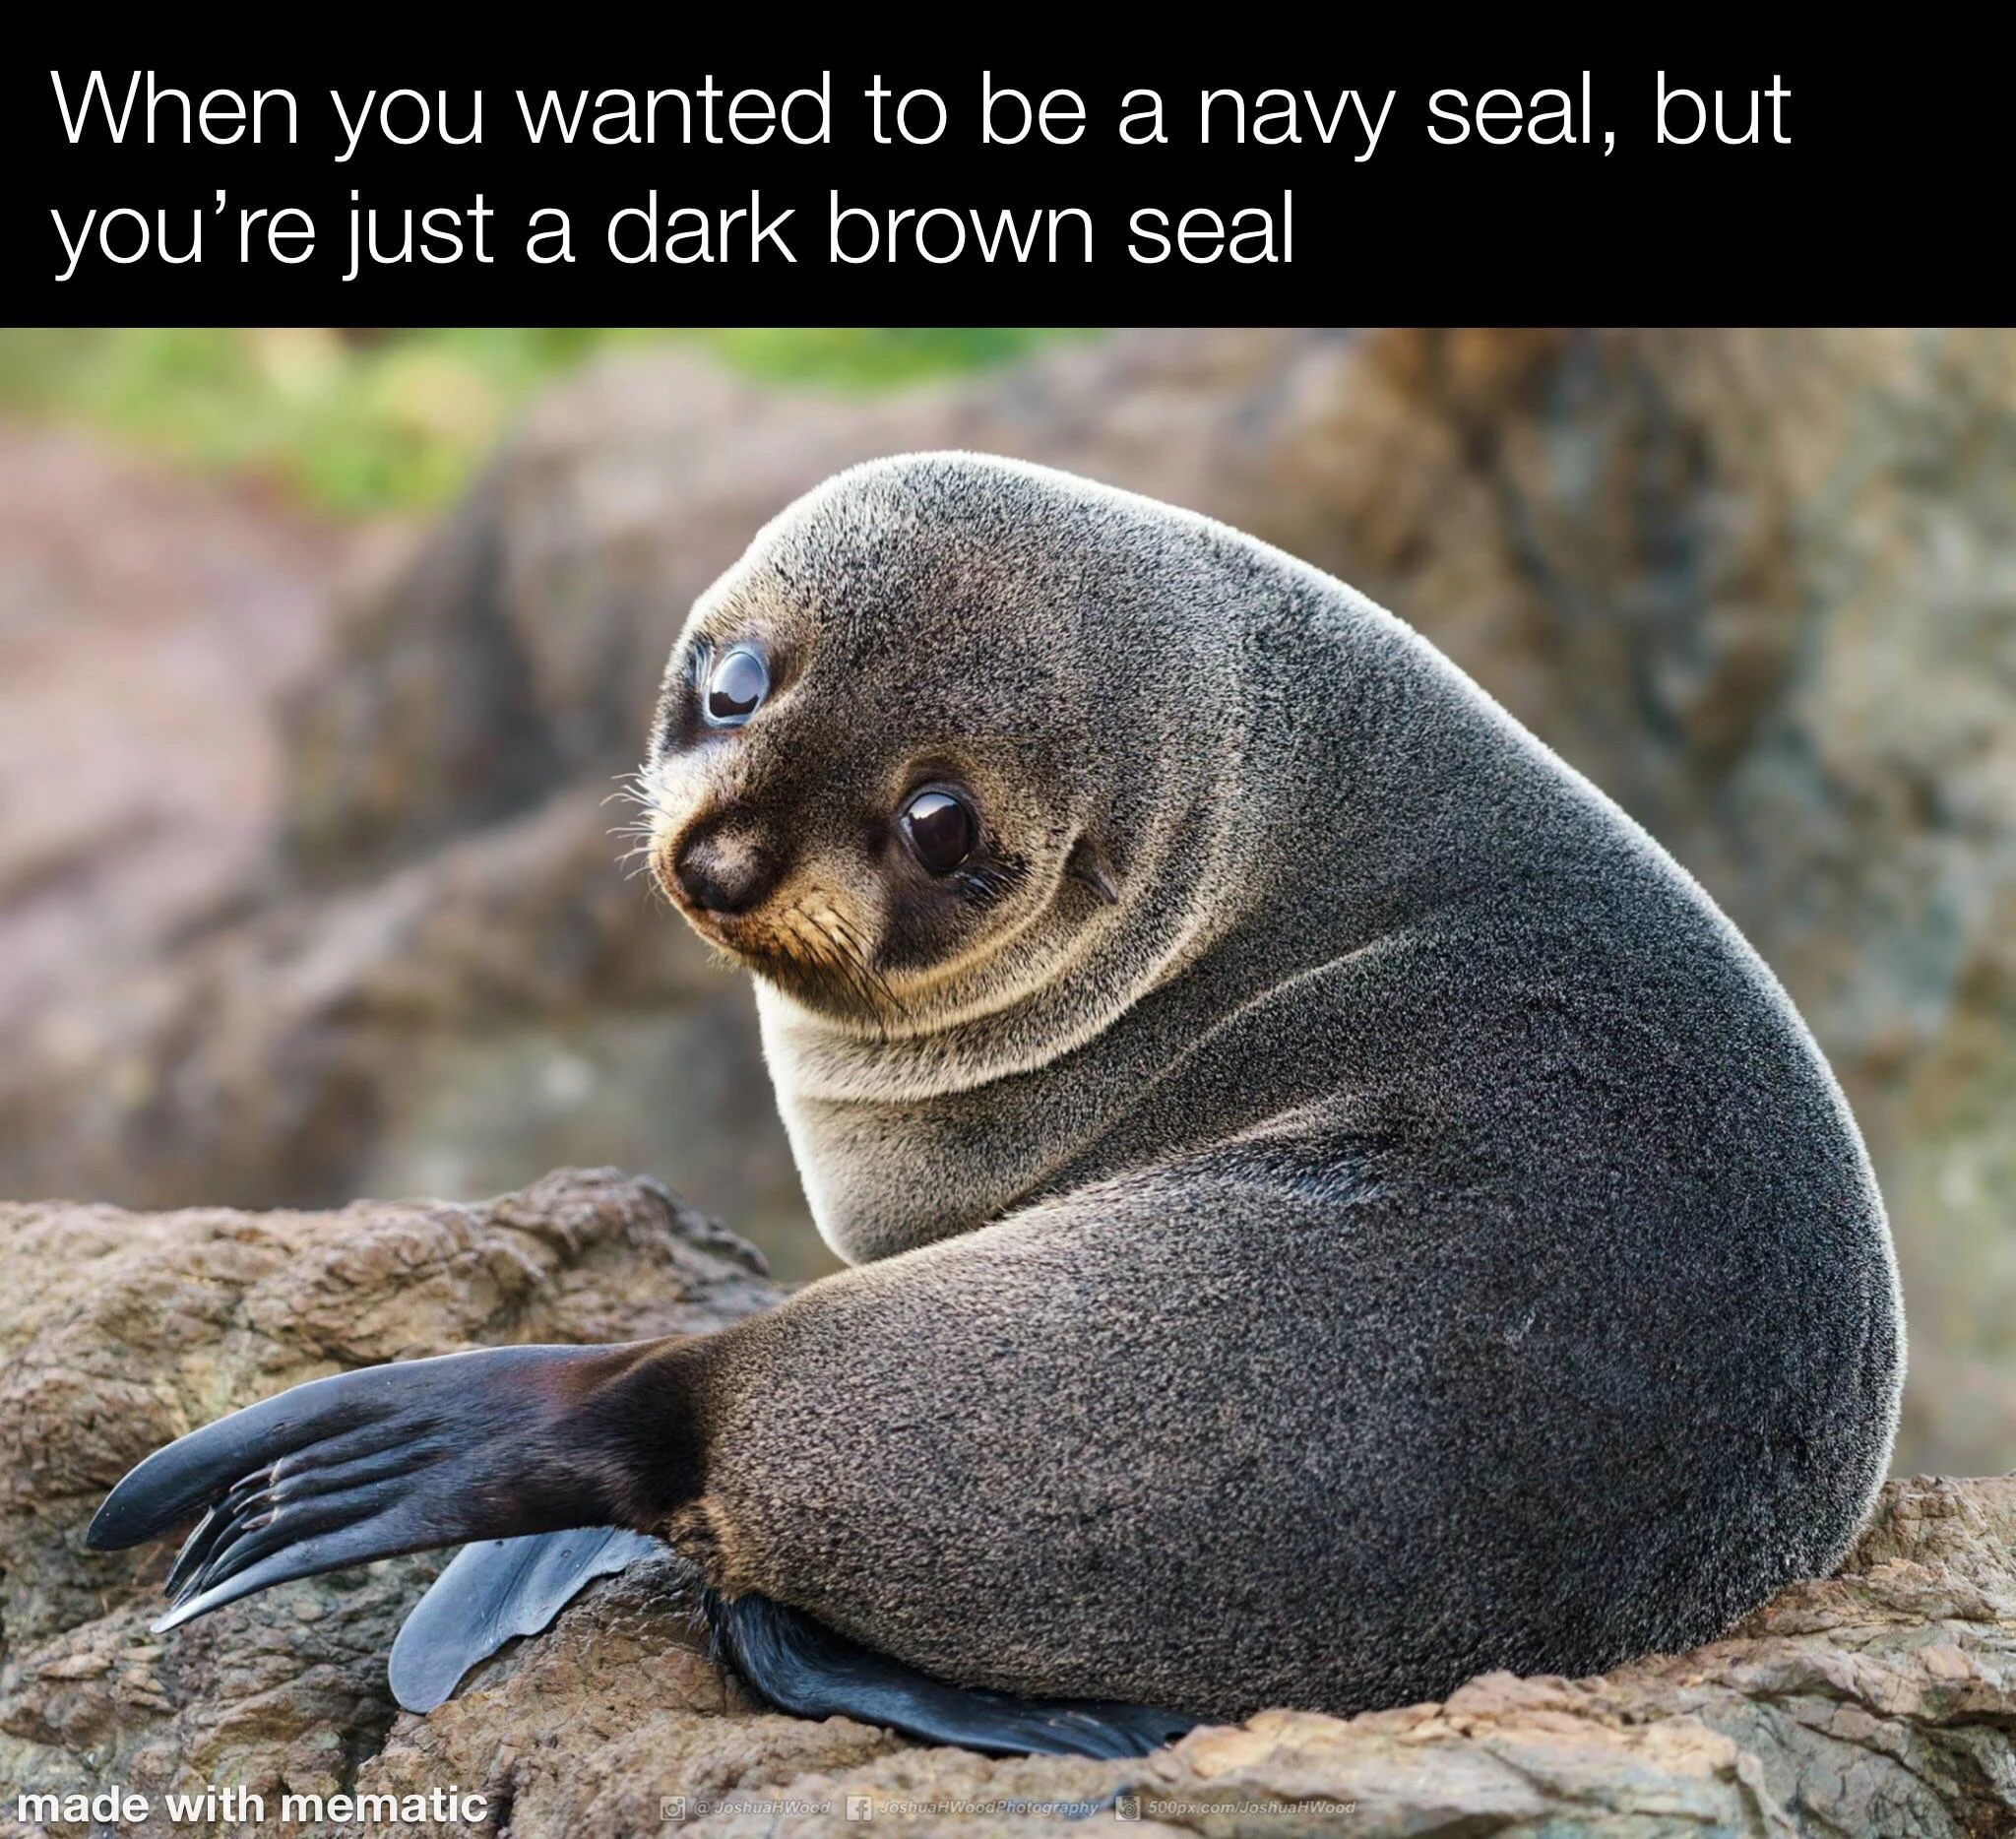 This Well-Crafted Pun Deserves A Seal Of Approval